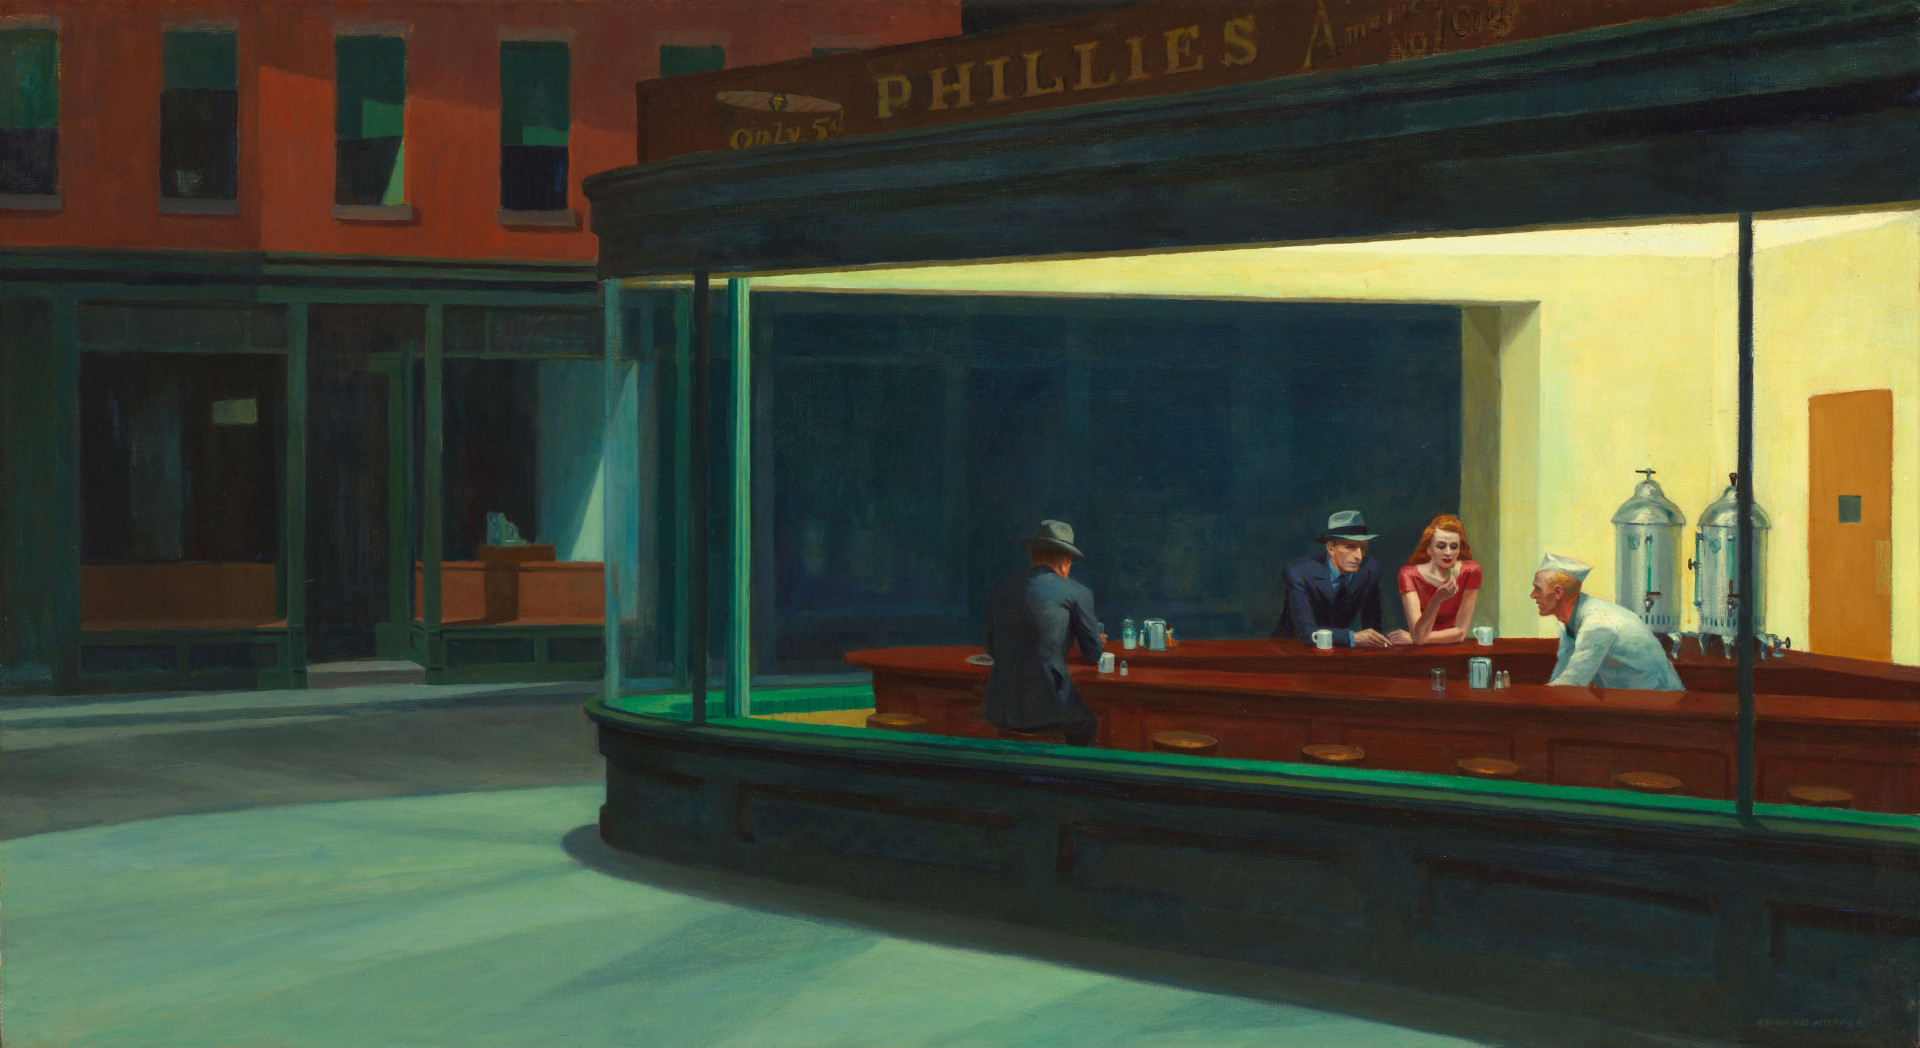 <p>According to speculation, Edward Hopper's renowned painting from the 20th century might not actually portray a New York restaurant in Mulry Square, as previously believed. Instead, it seems to be a combination of various locations in the city.</p>